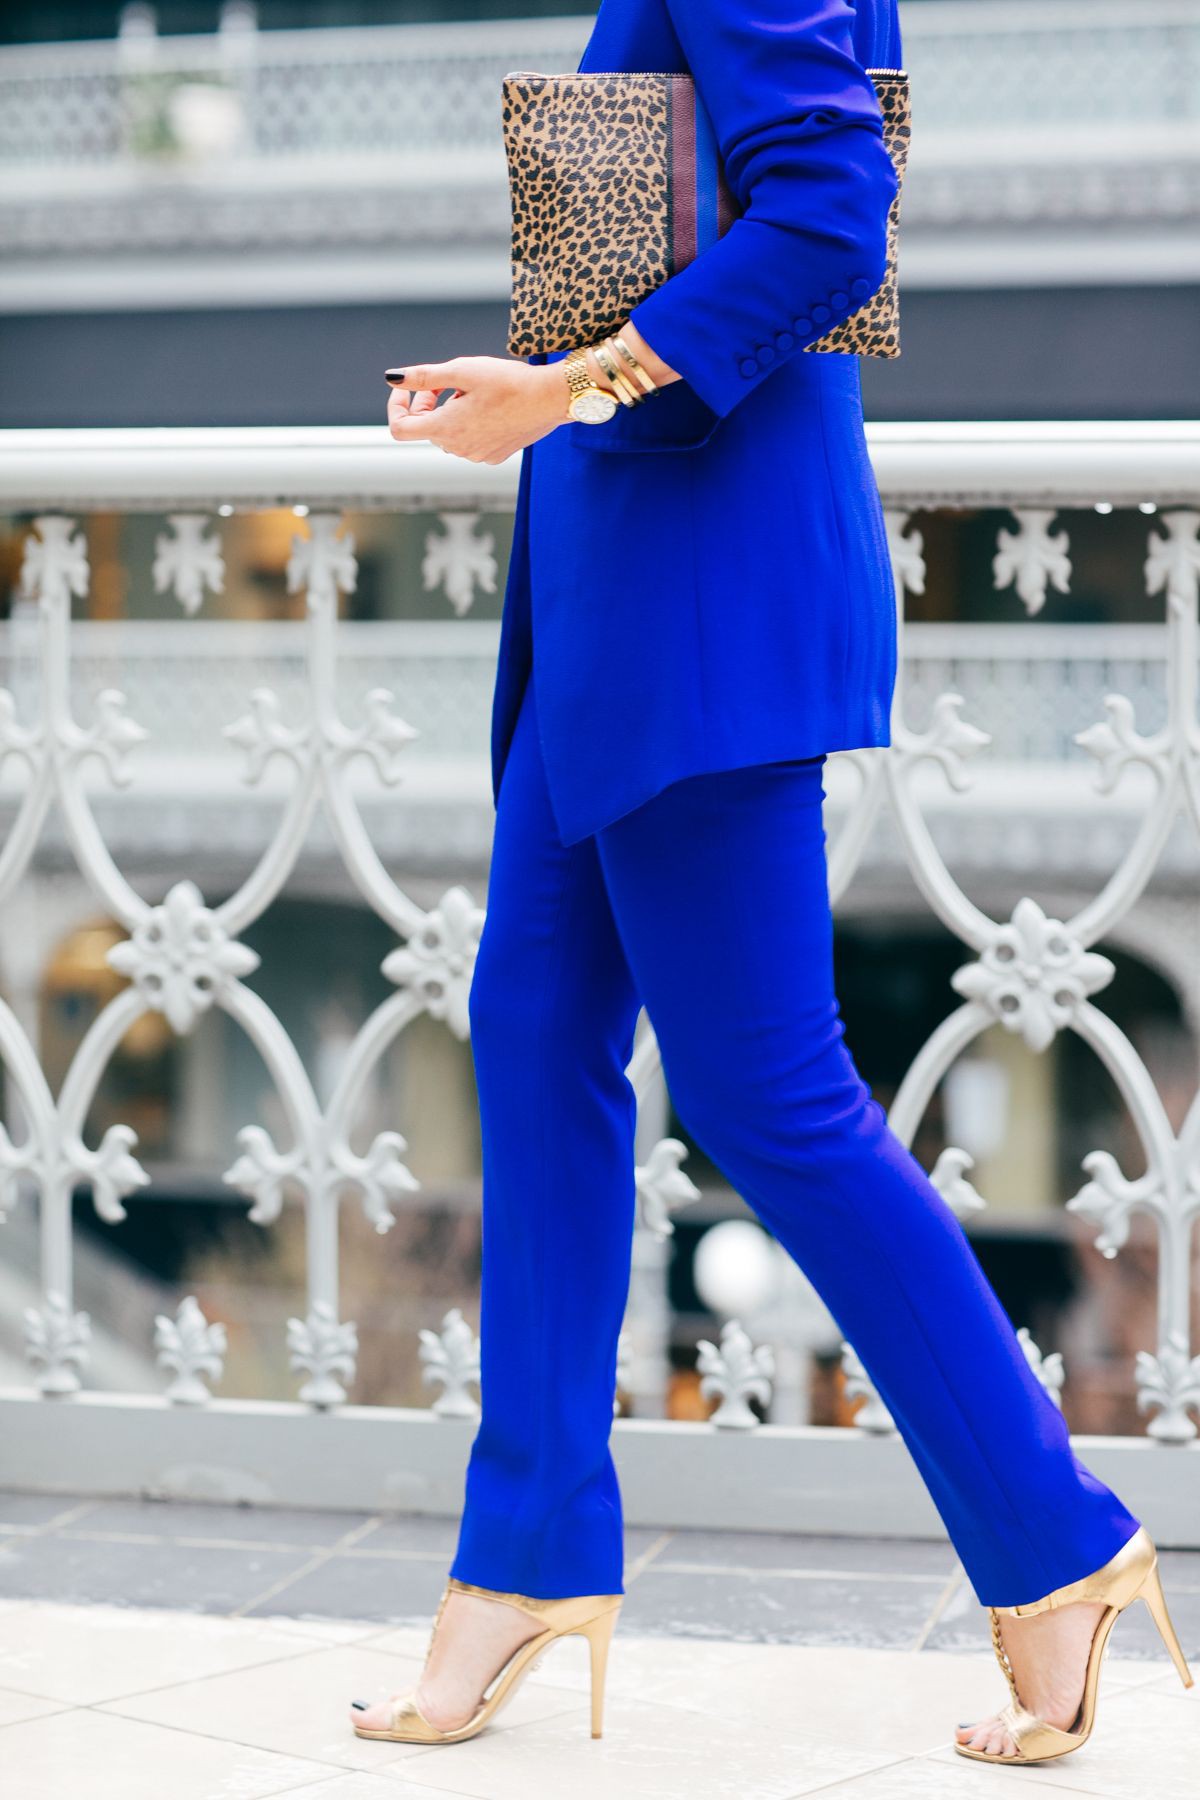 Latest and best cobalt blue, Royal blue: High-Heeled Shoe,  Royal blue,  Cobalt blue,  Blazer Outfit,  Street Style,  Casual Outfits  